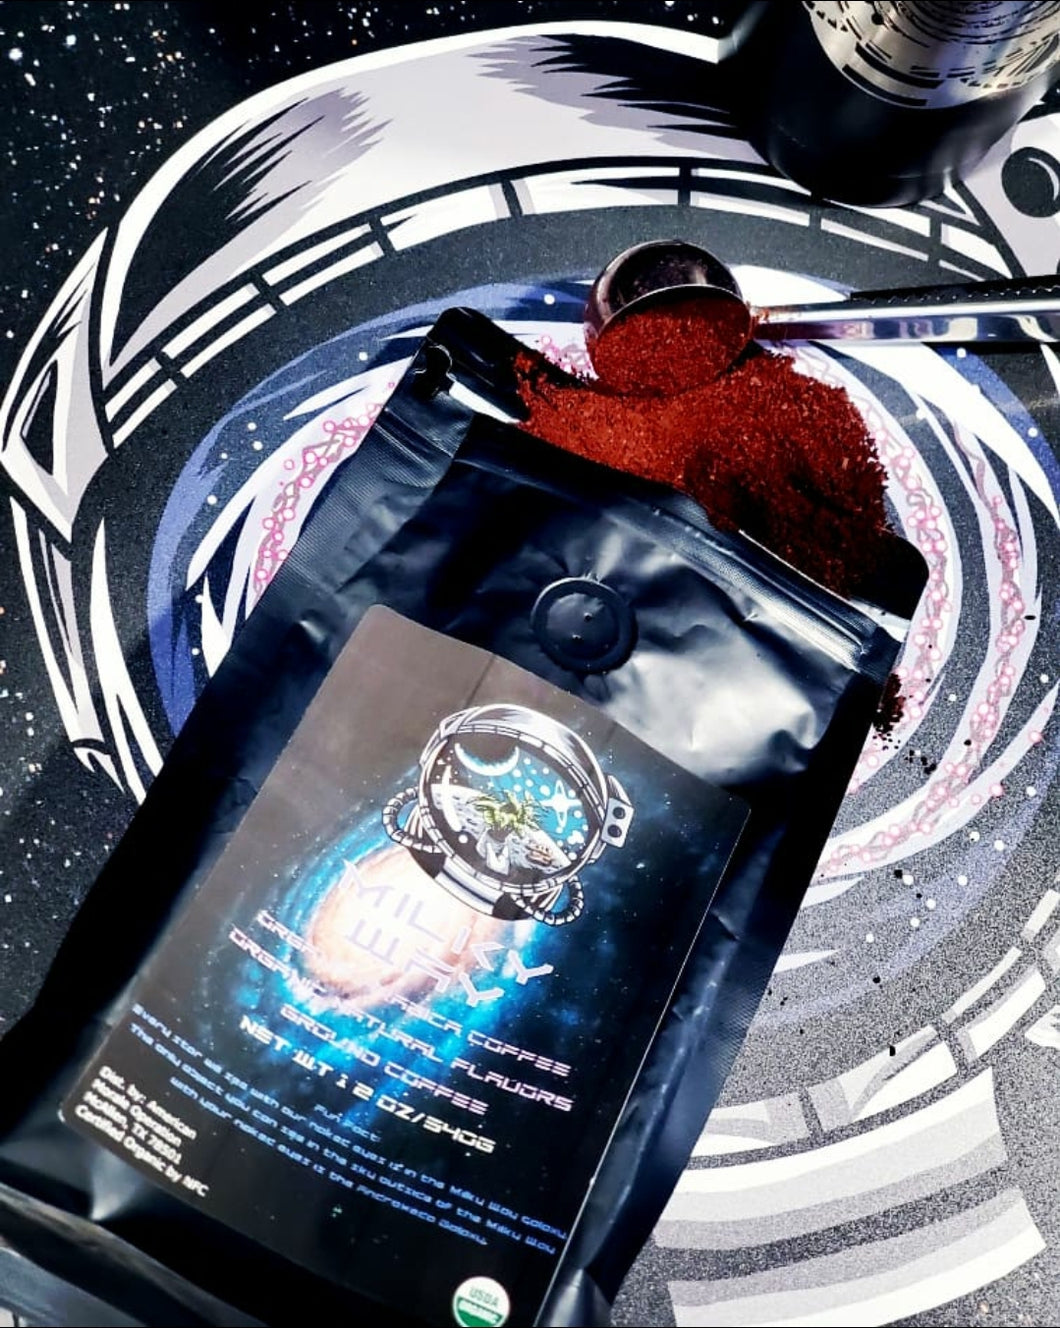 The Milky Way [ Coffee Blend ]